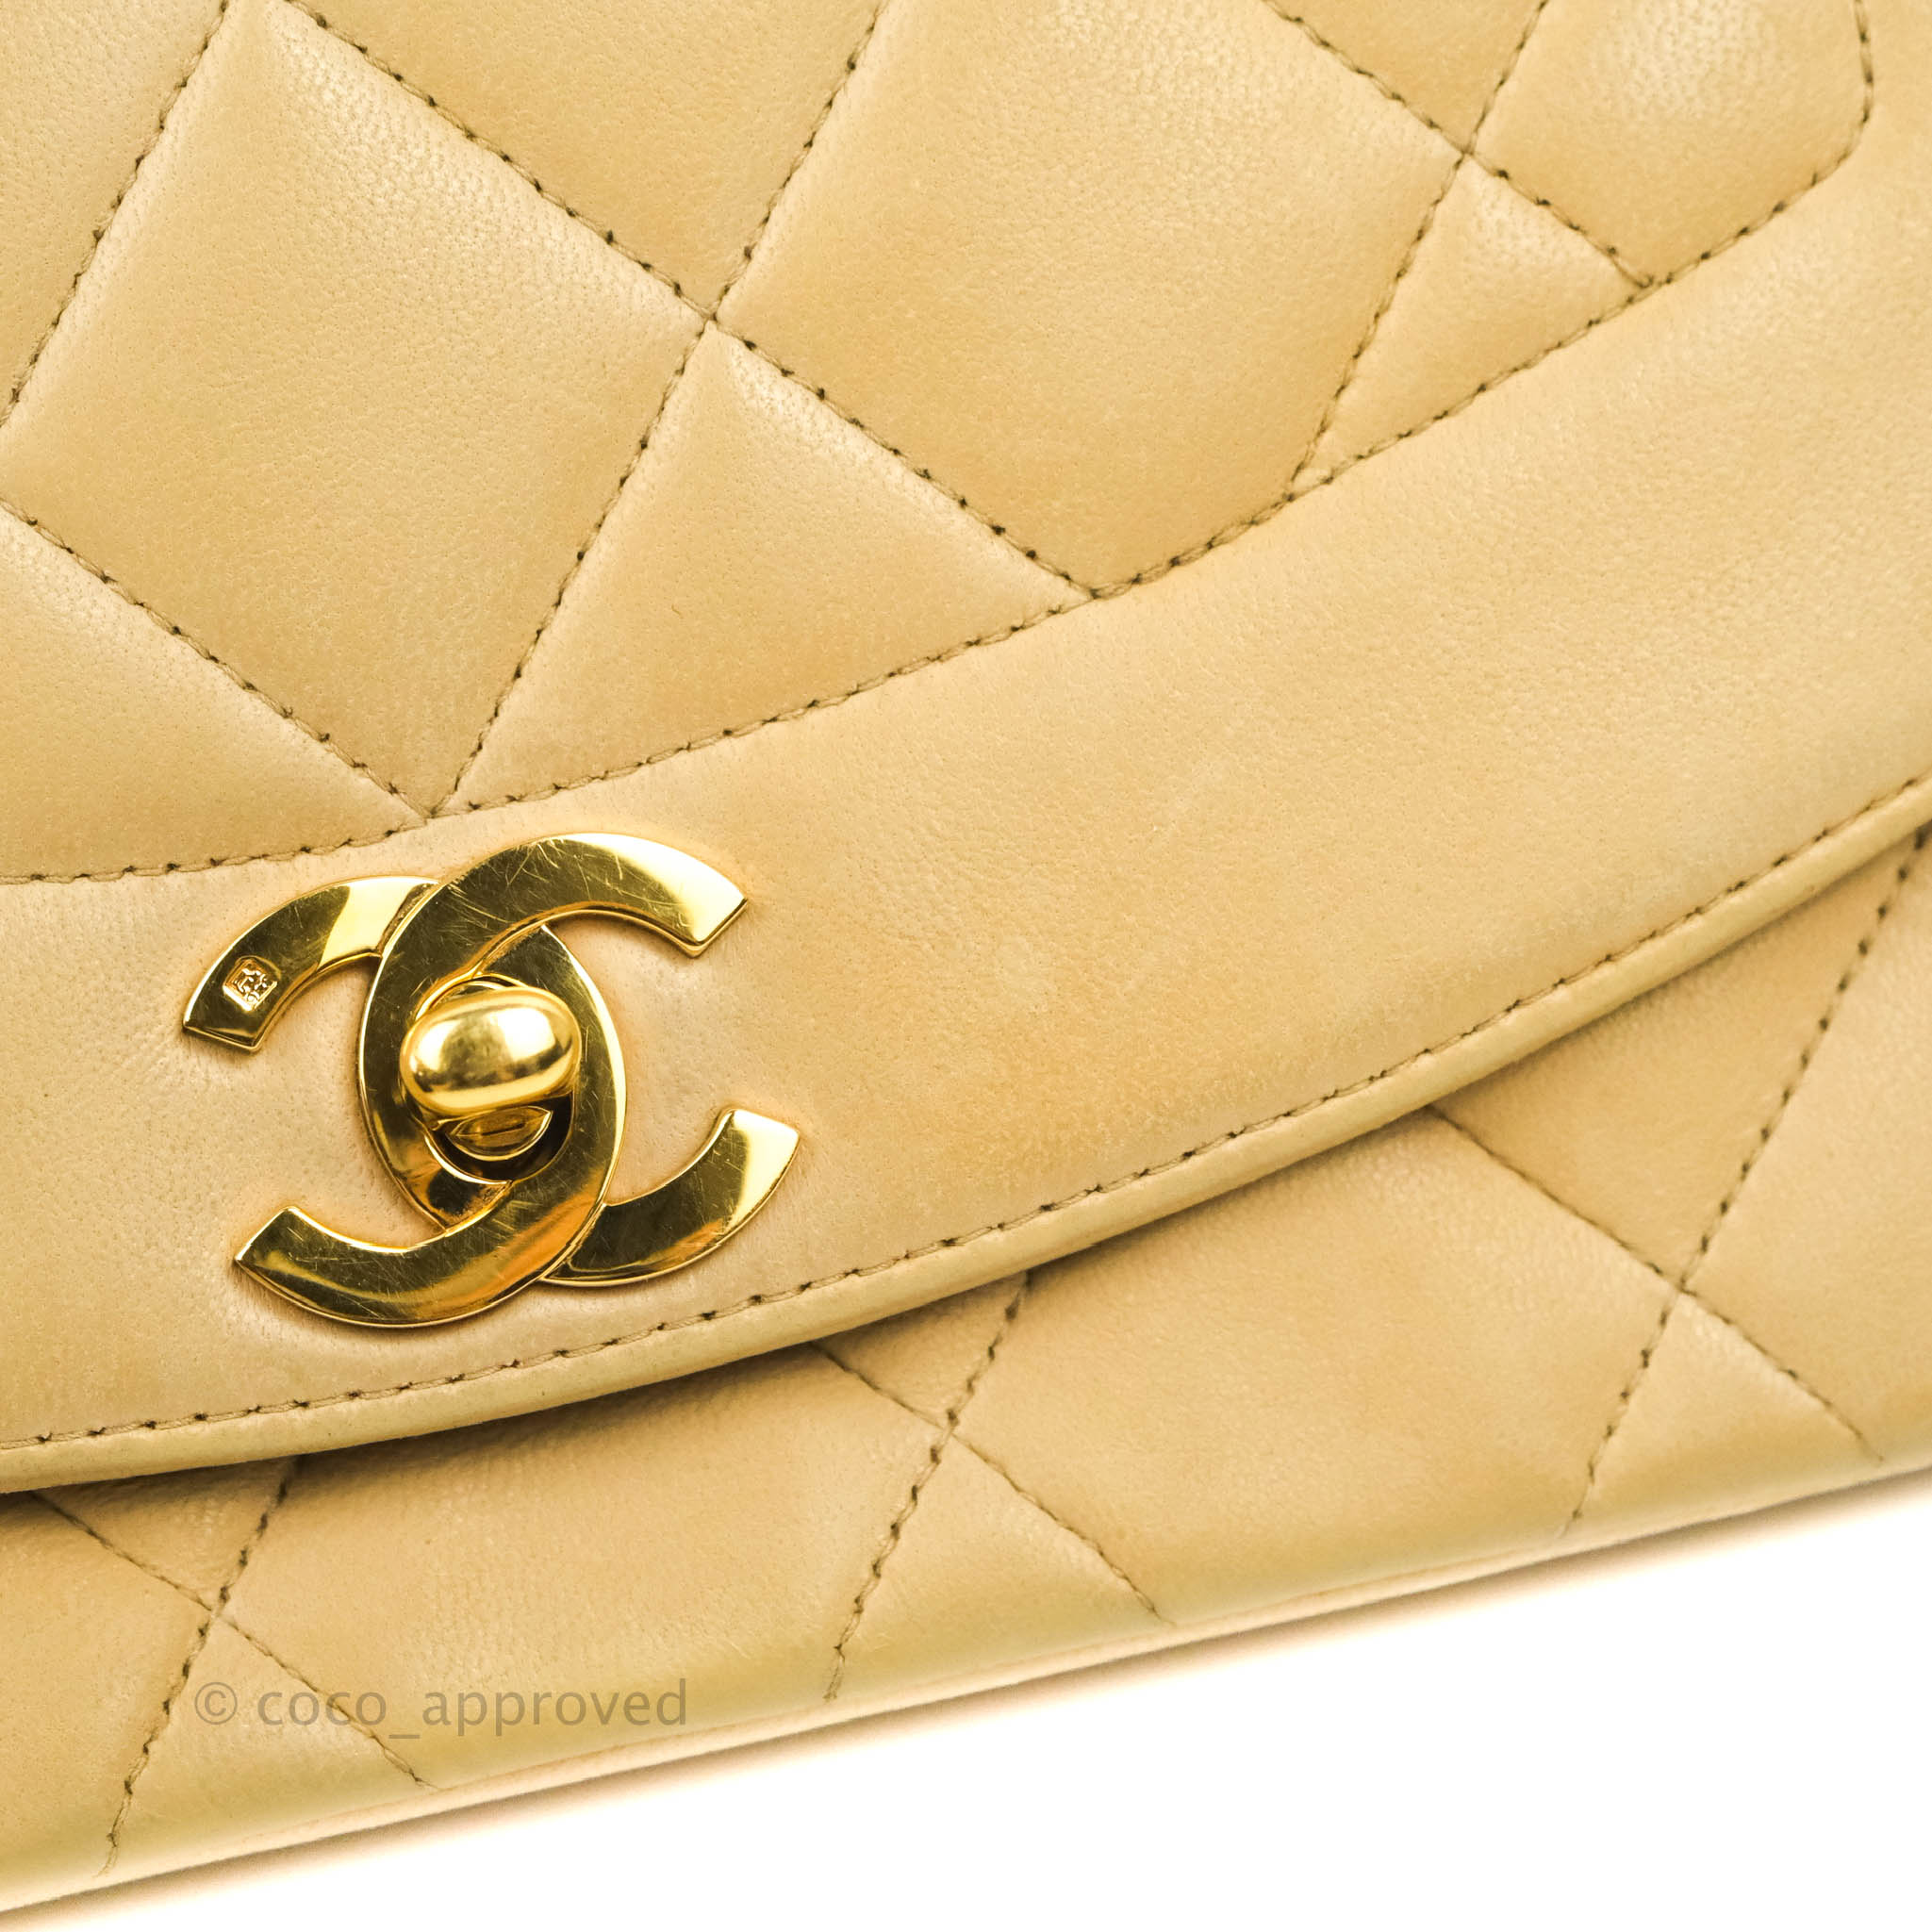 Chanel Vintage Small Quilted Classic Diana Flap Bag Beige Lambskin 24K –  Coco Approved Studio